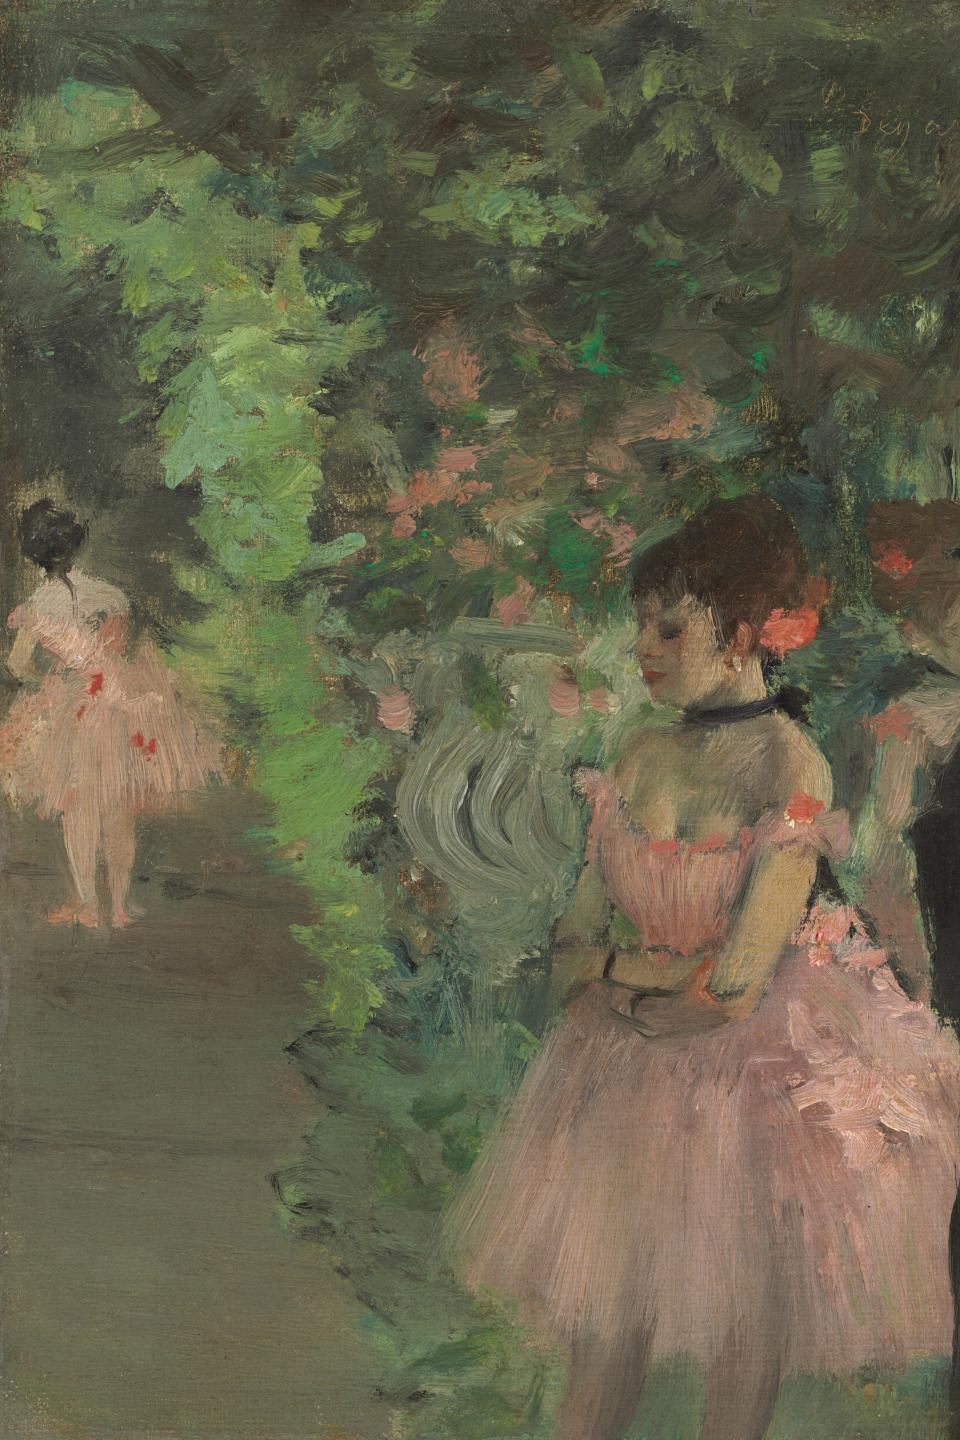 Edgar Degas, Dancers Backstage, 1876/1883. Oil on canvas; overall: 24.2 x 18.8 cm (9 1/2 x 7 3/8 in.). National Gallery of Art, Washington, Ailsa Mellon Bruce Collection